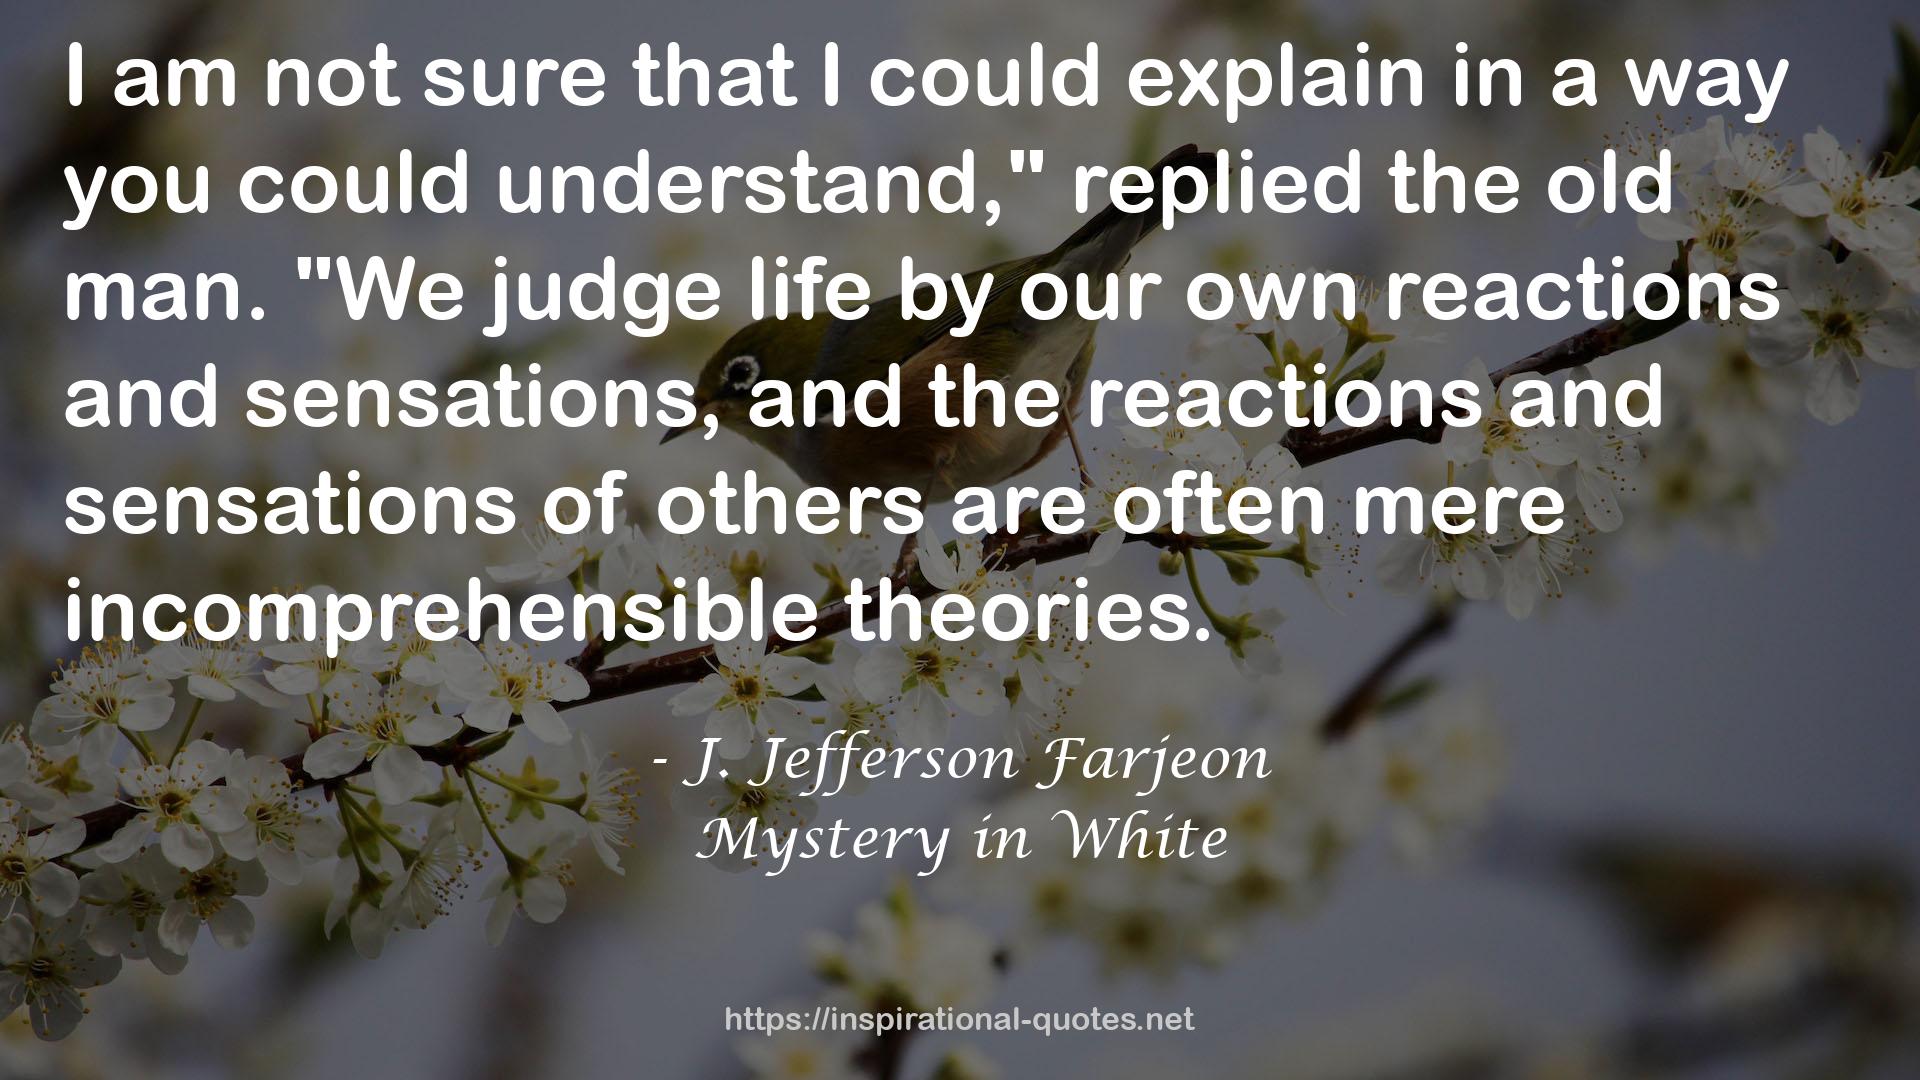 Mystery in White QUOTES